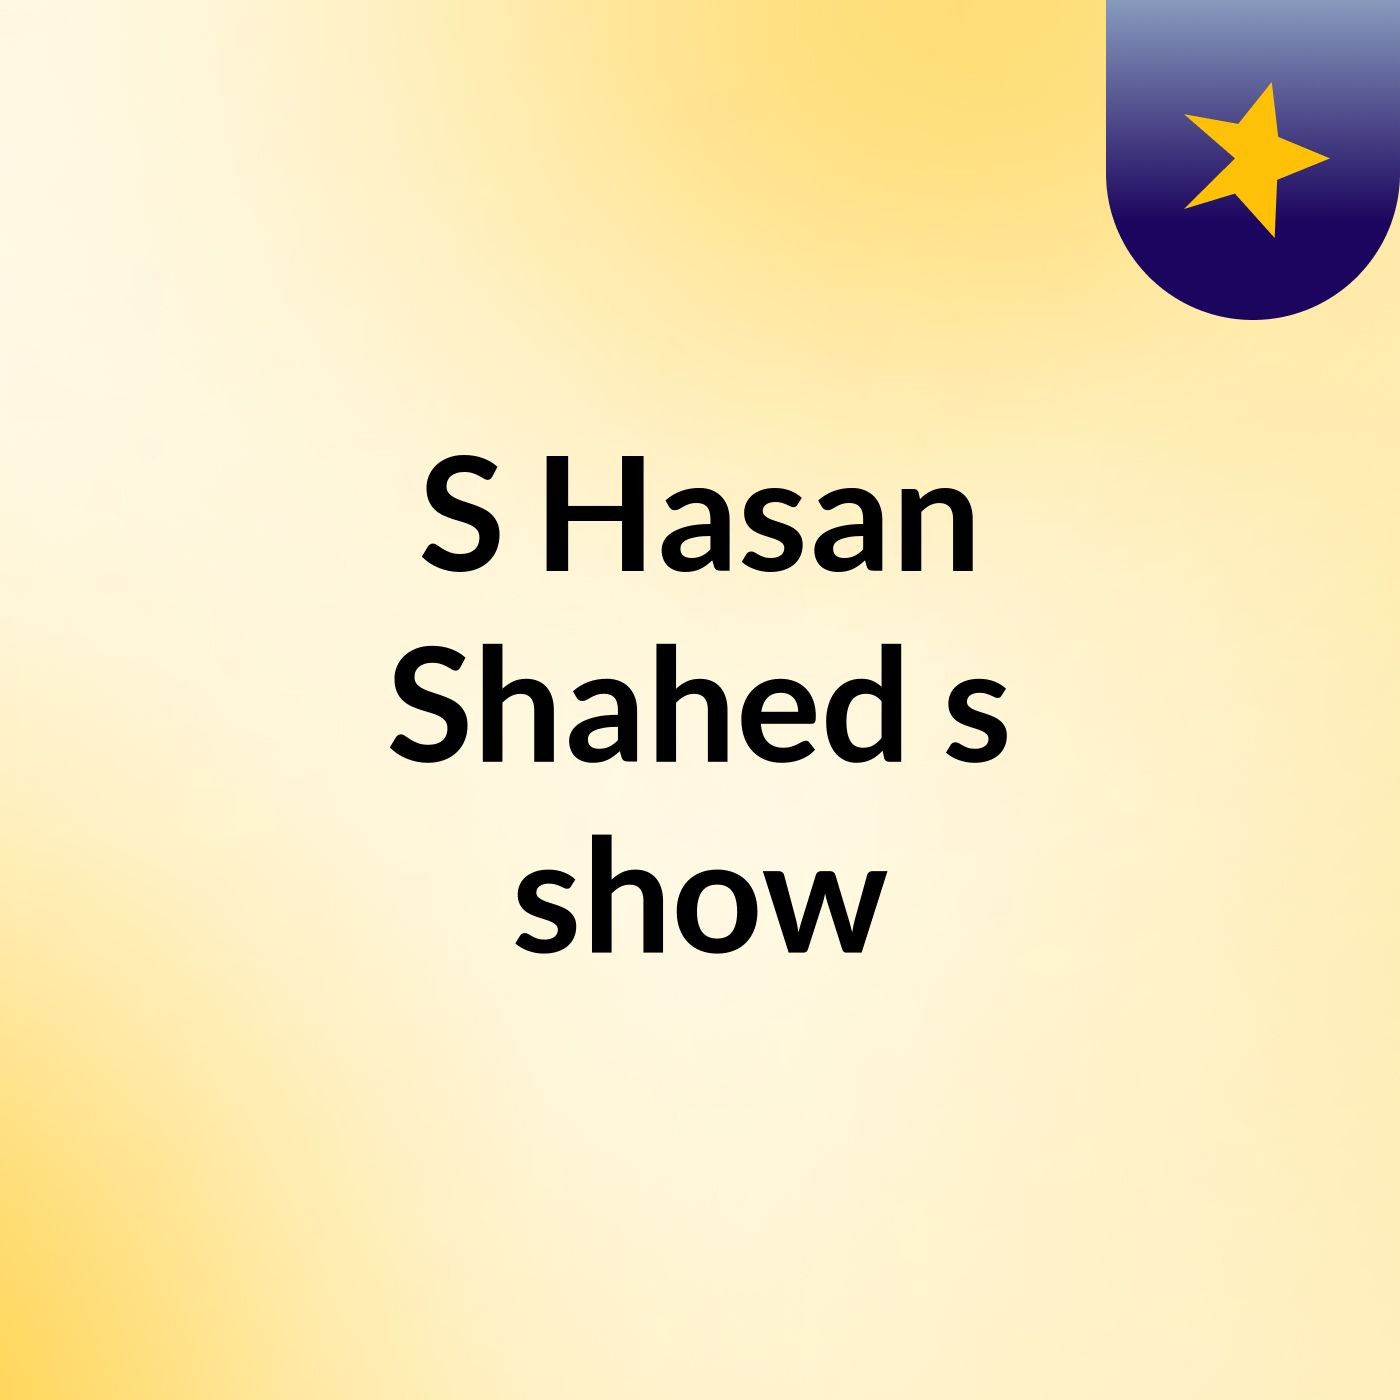 S Hasan Shahed's show